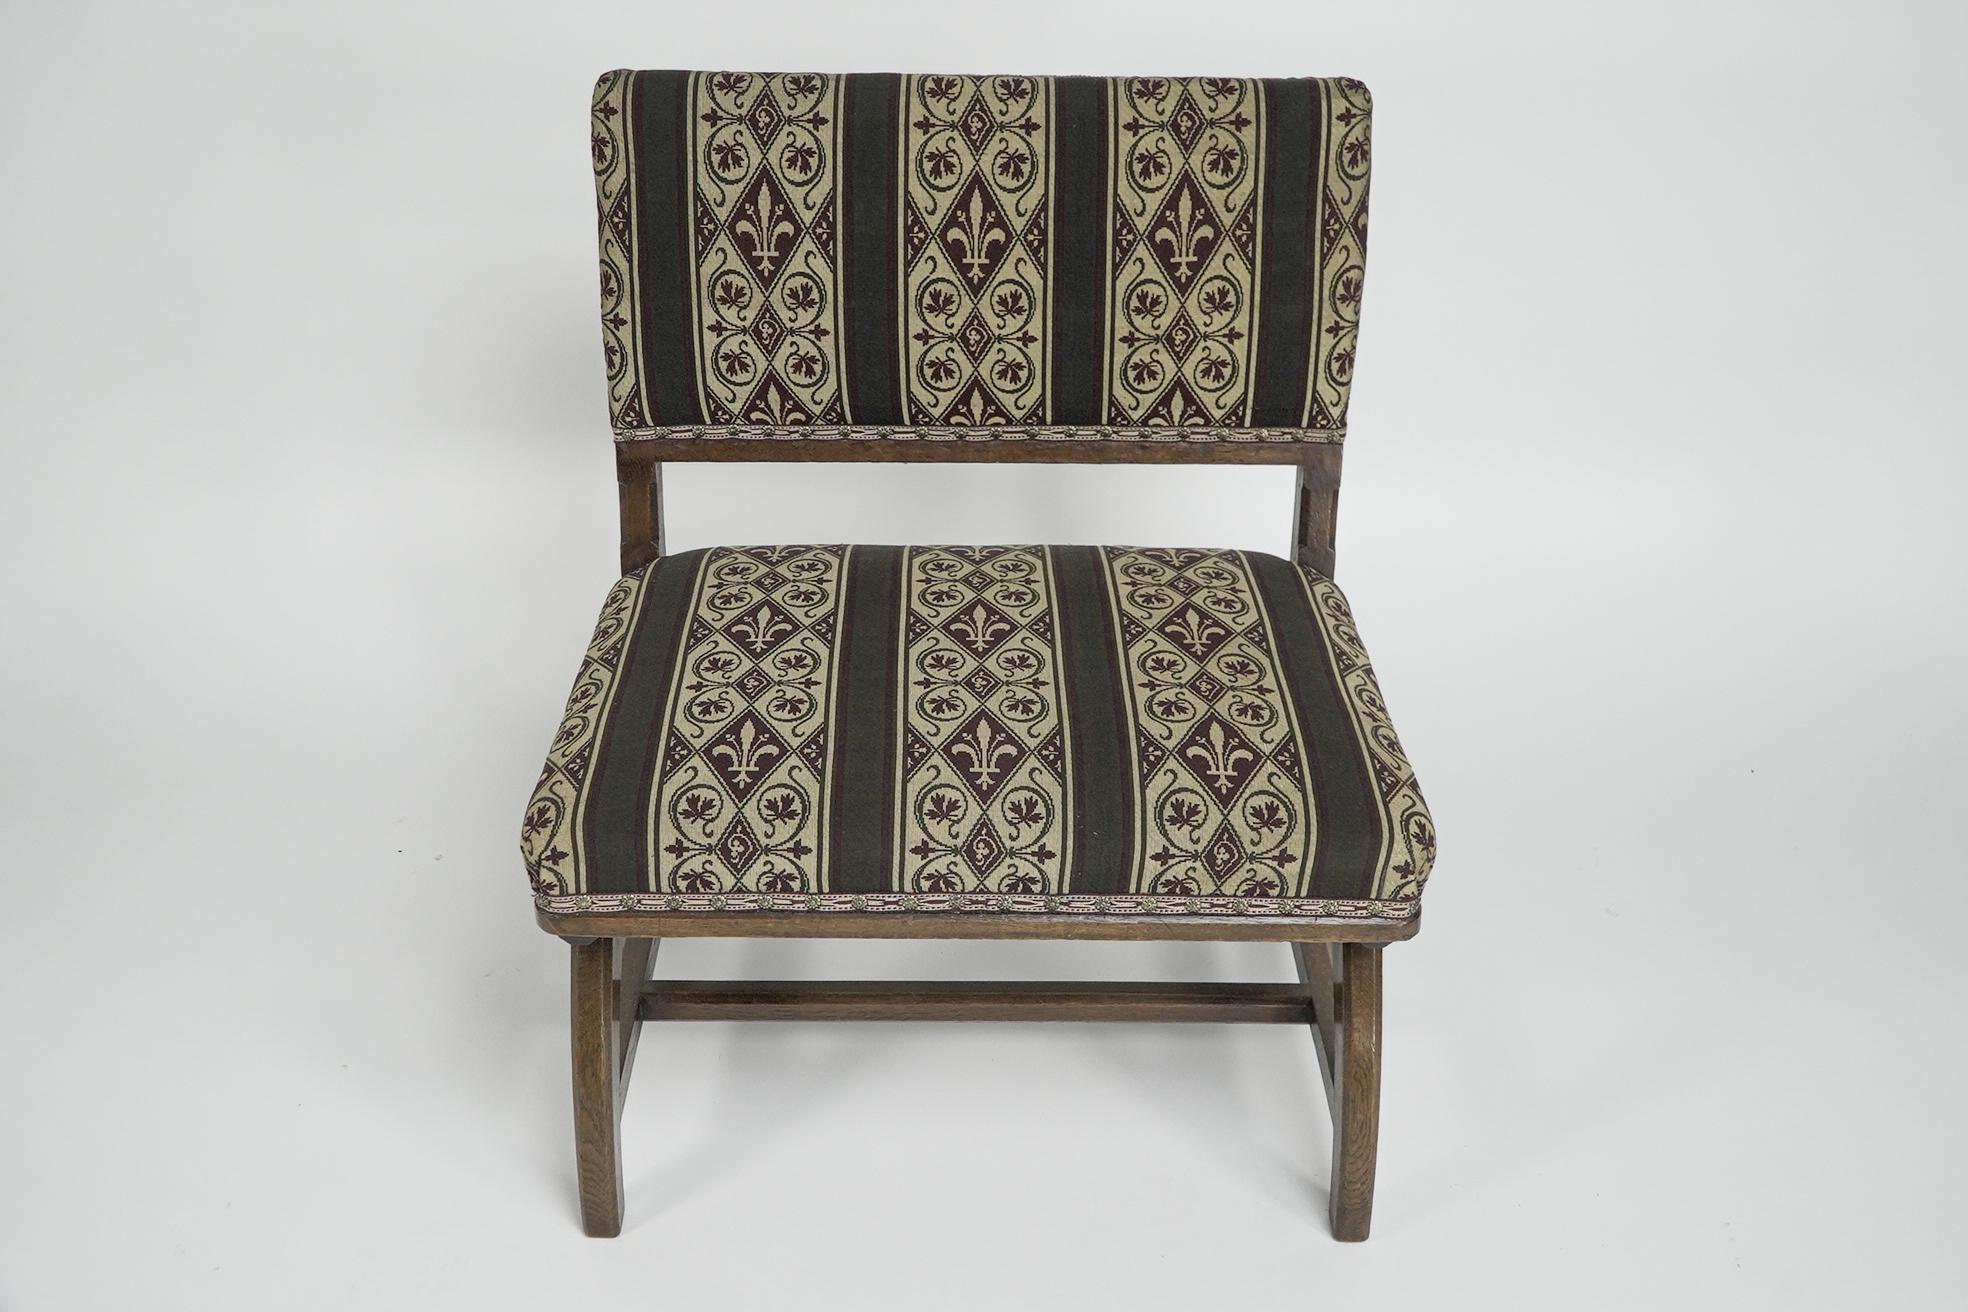 E W Pugin attri. A Gothic Revival oak duet chair with a wider than usual seat. For Sale 1